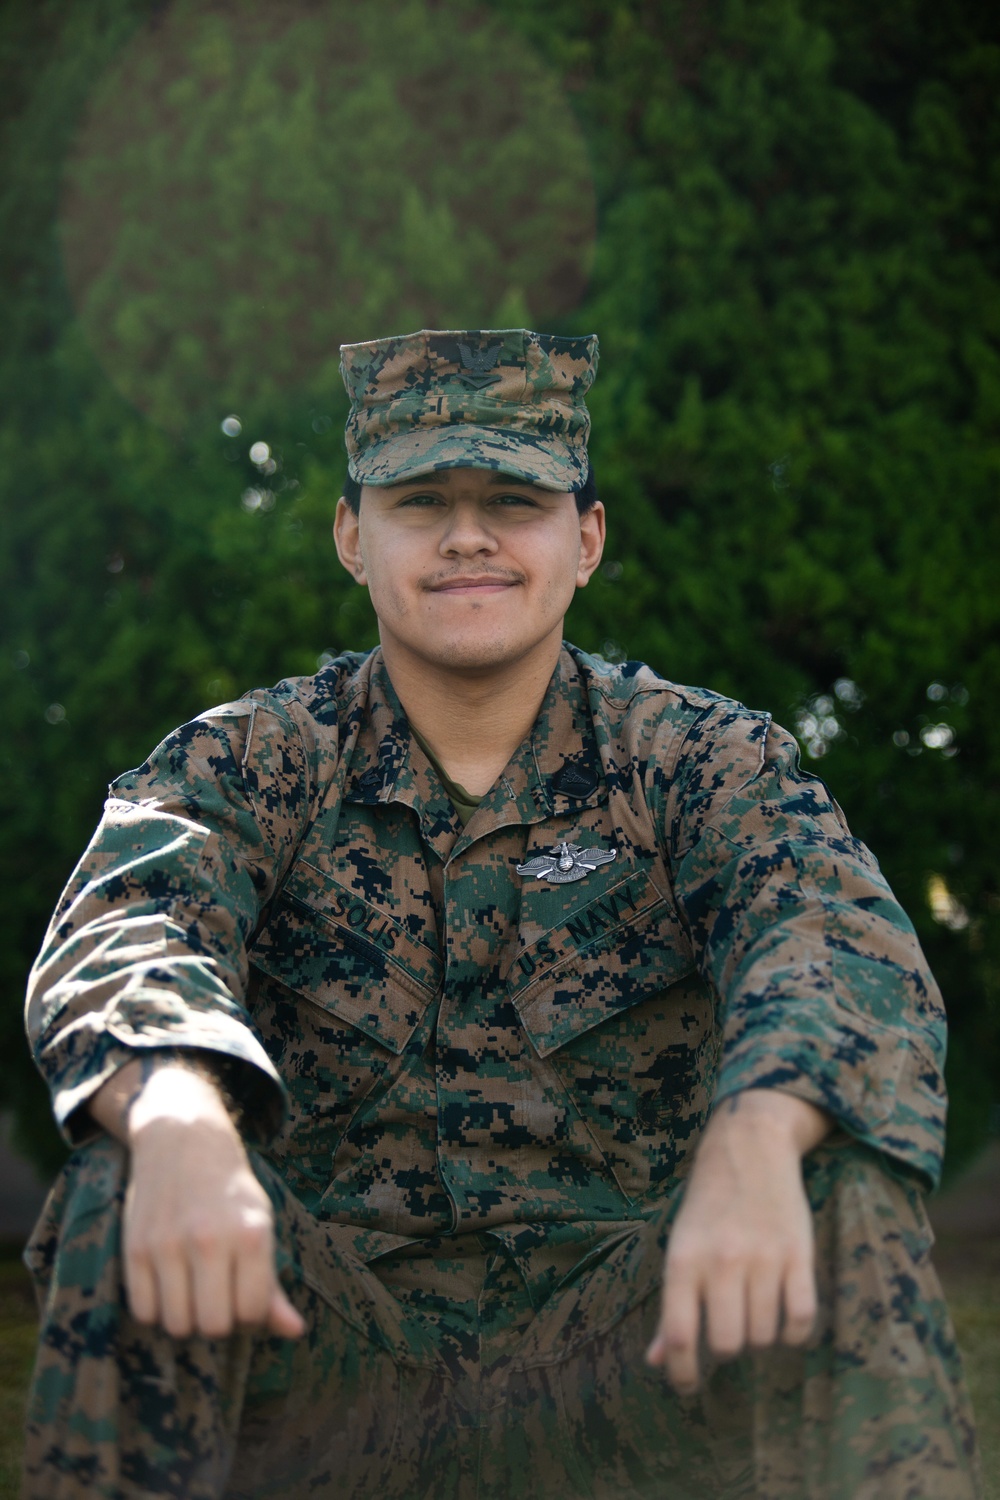 Helping was always the choice he was going to make: US Navy Corpsman reflects on career, values